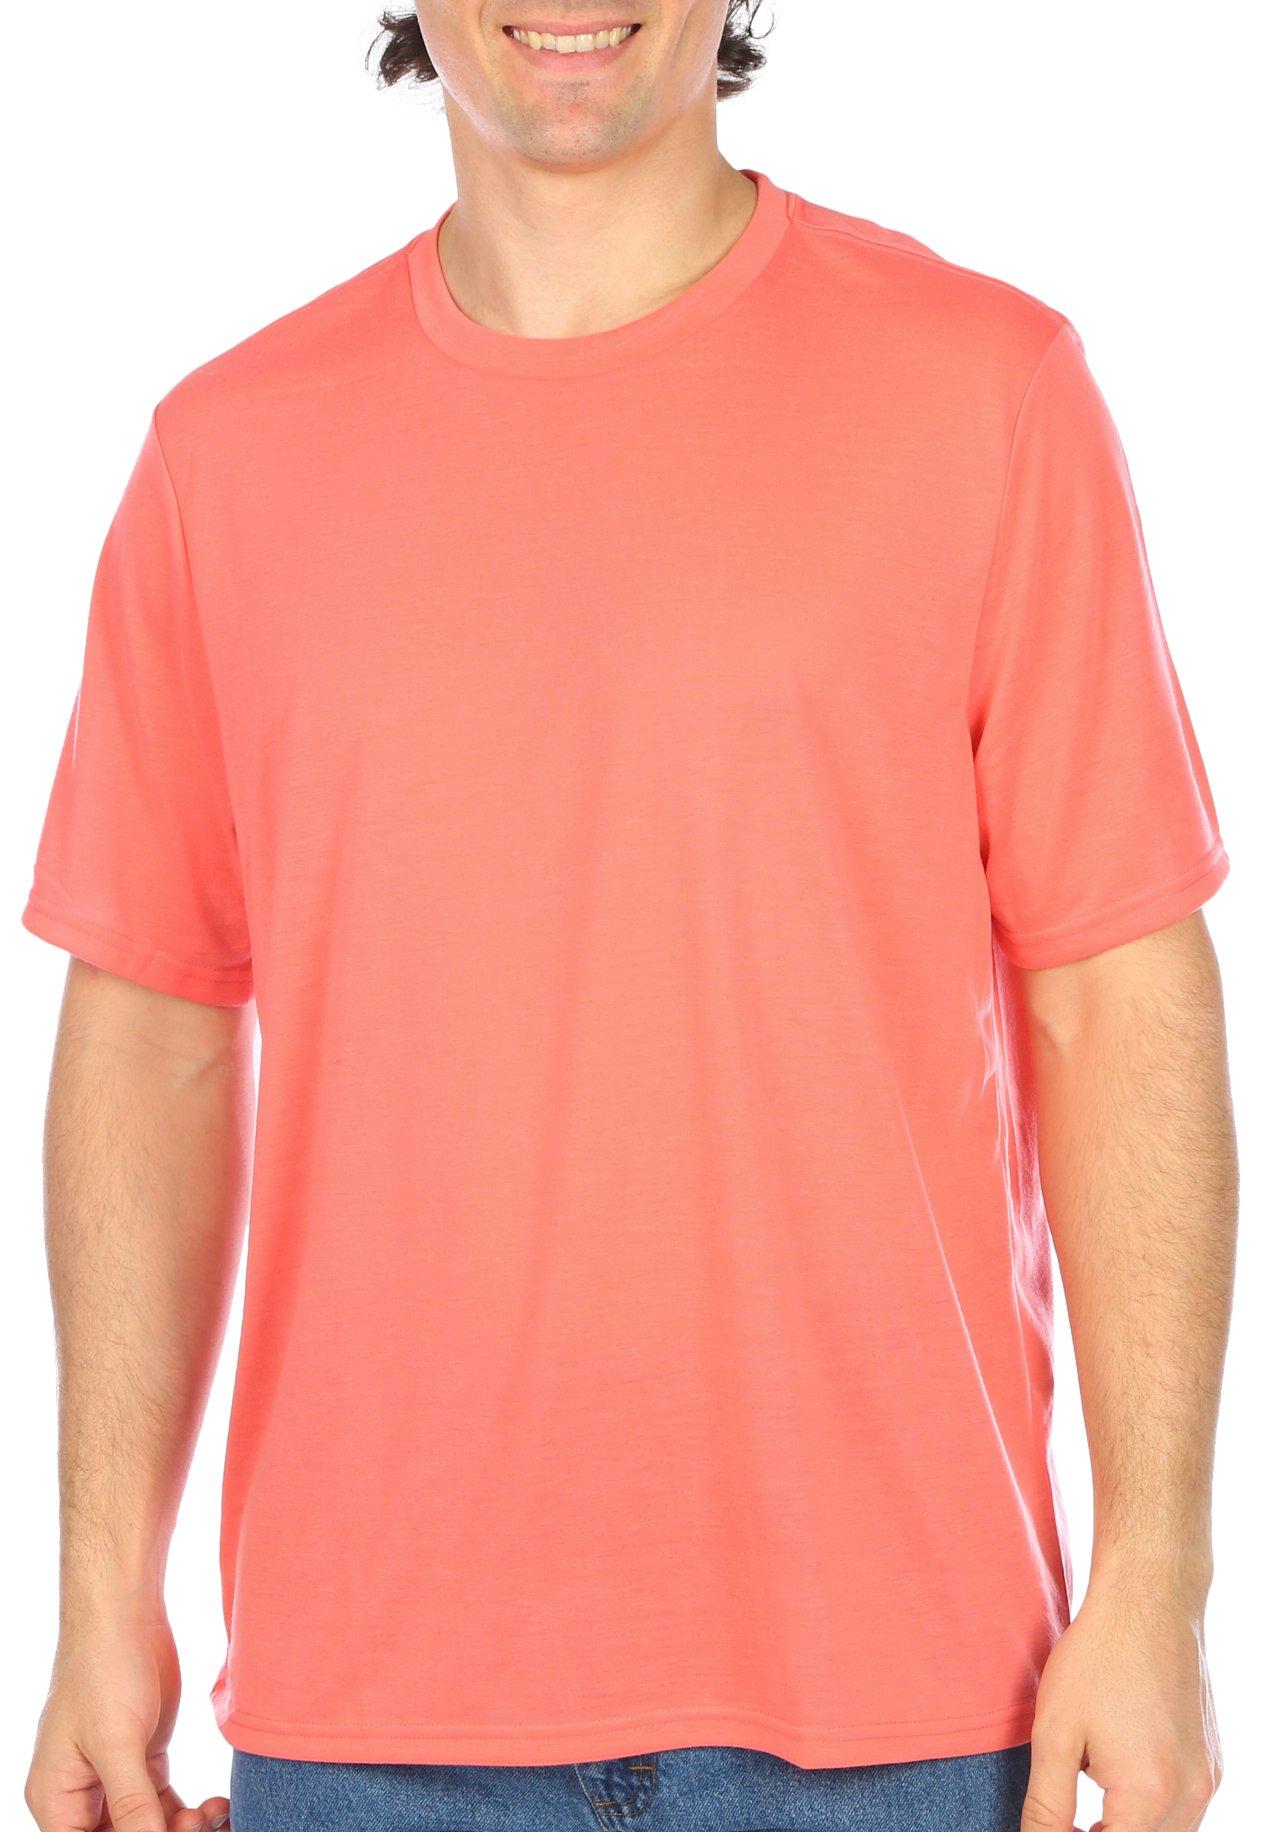 Mens Solid Quick Dry Short Sleeve T-Shirt